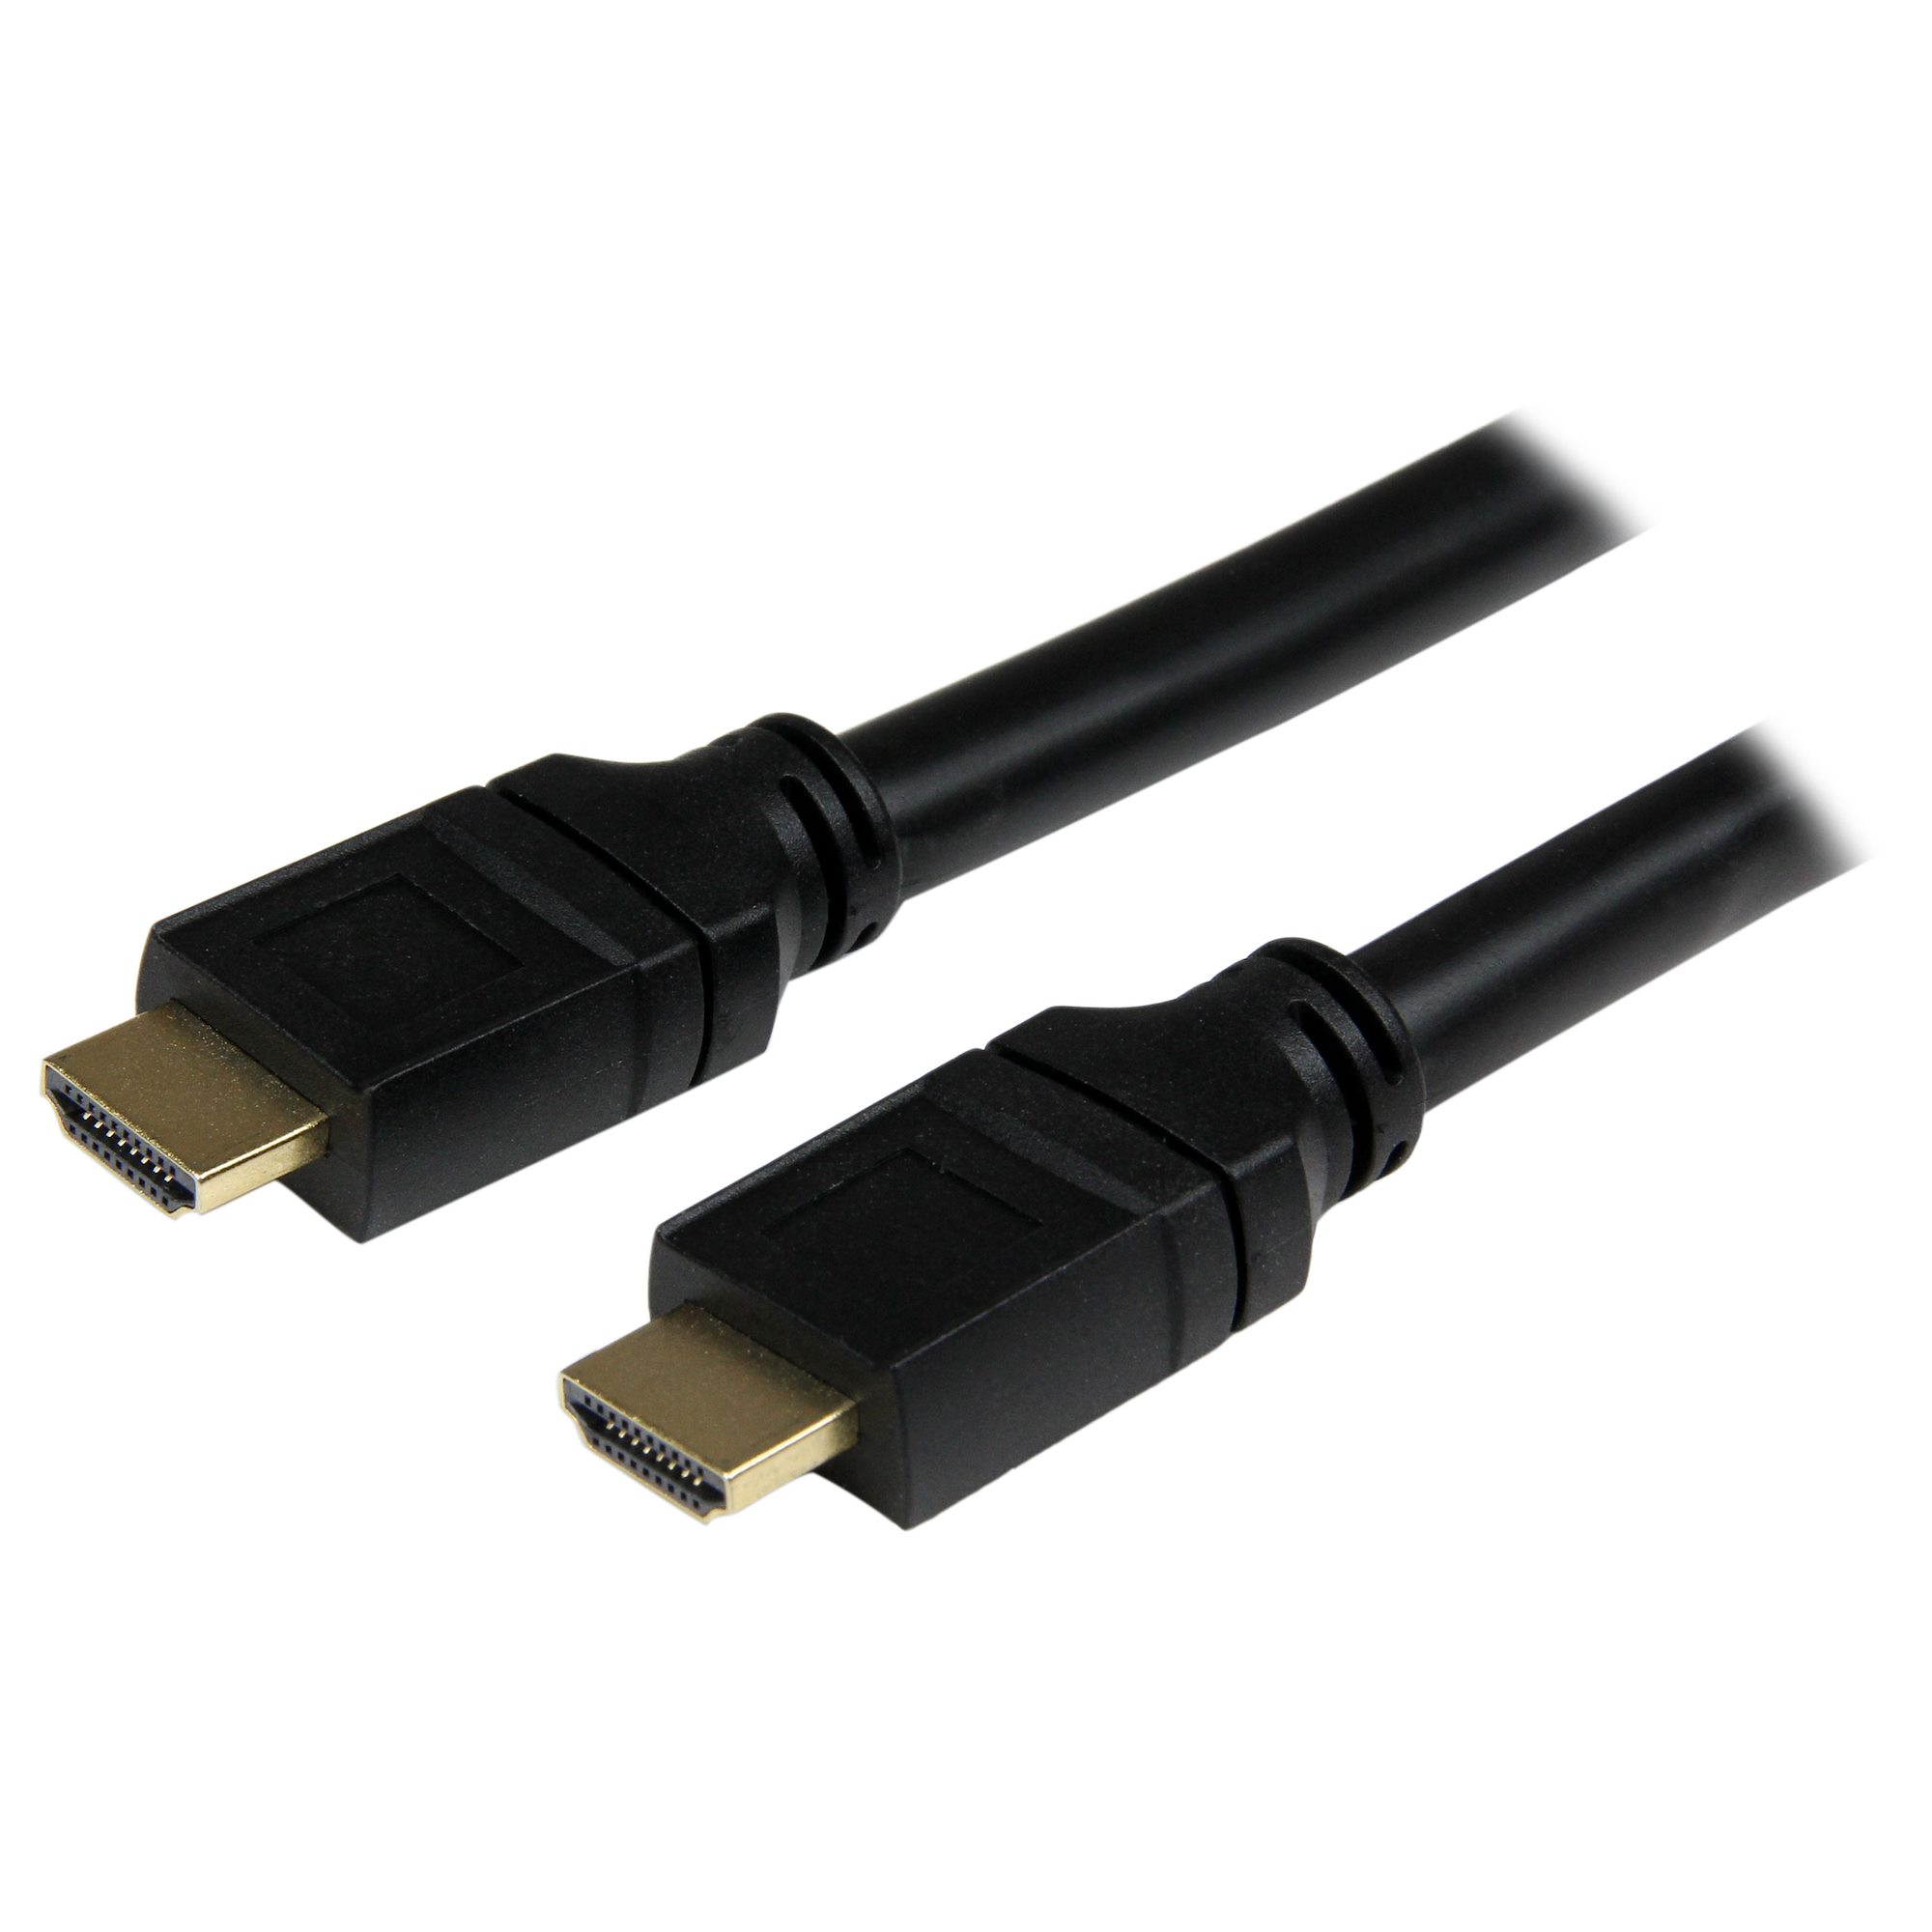 【HDPMM50】50 FT PLENUM-RATED HDMI CABLE